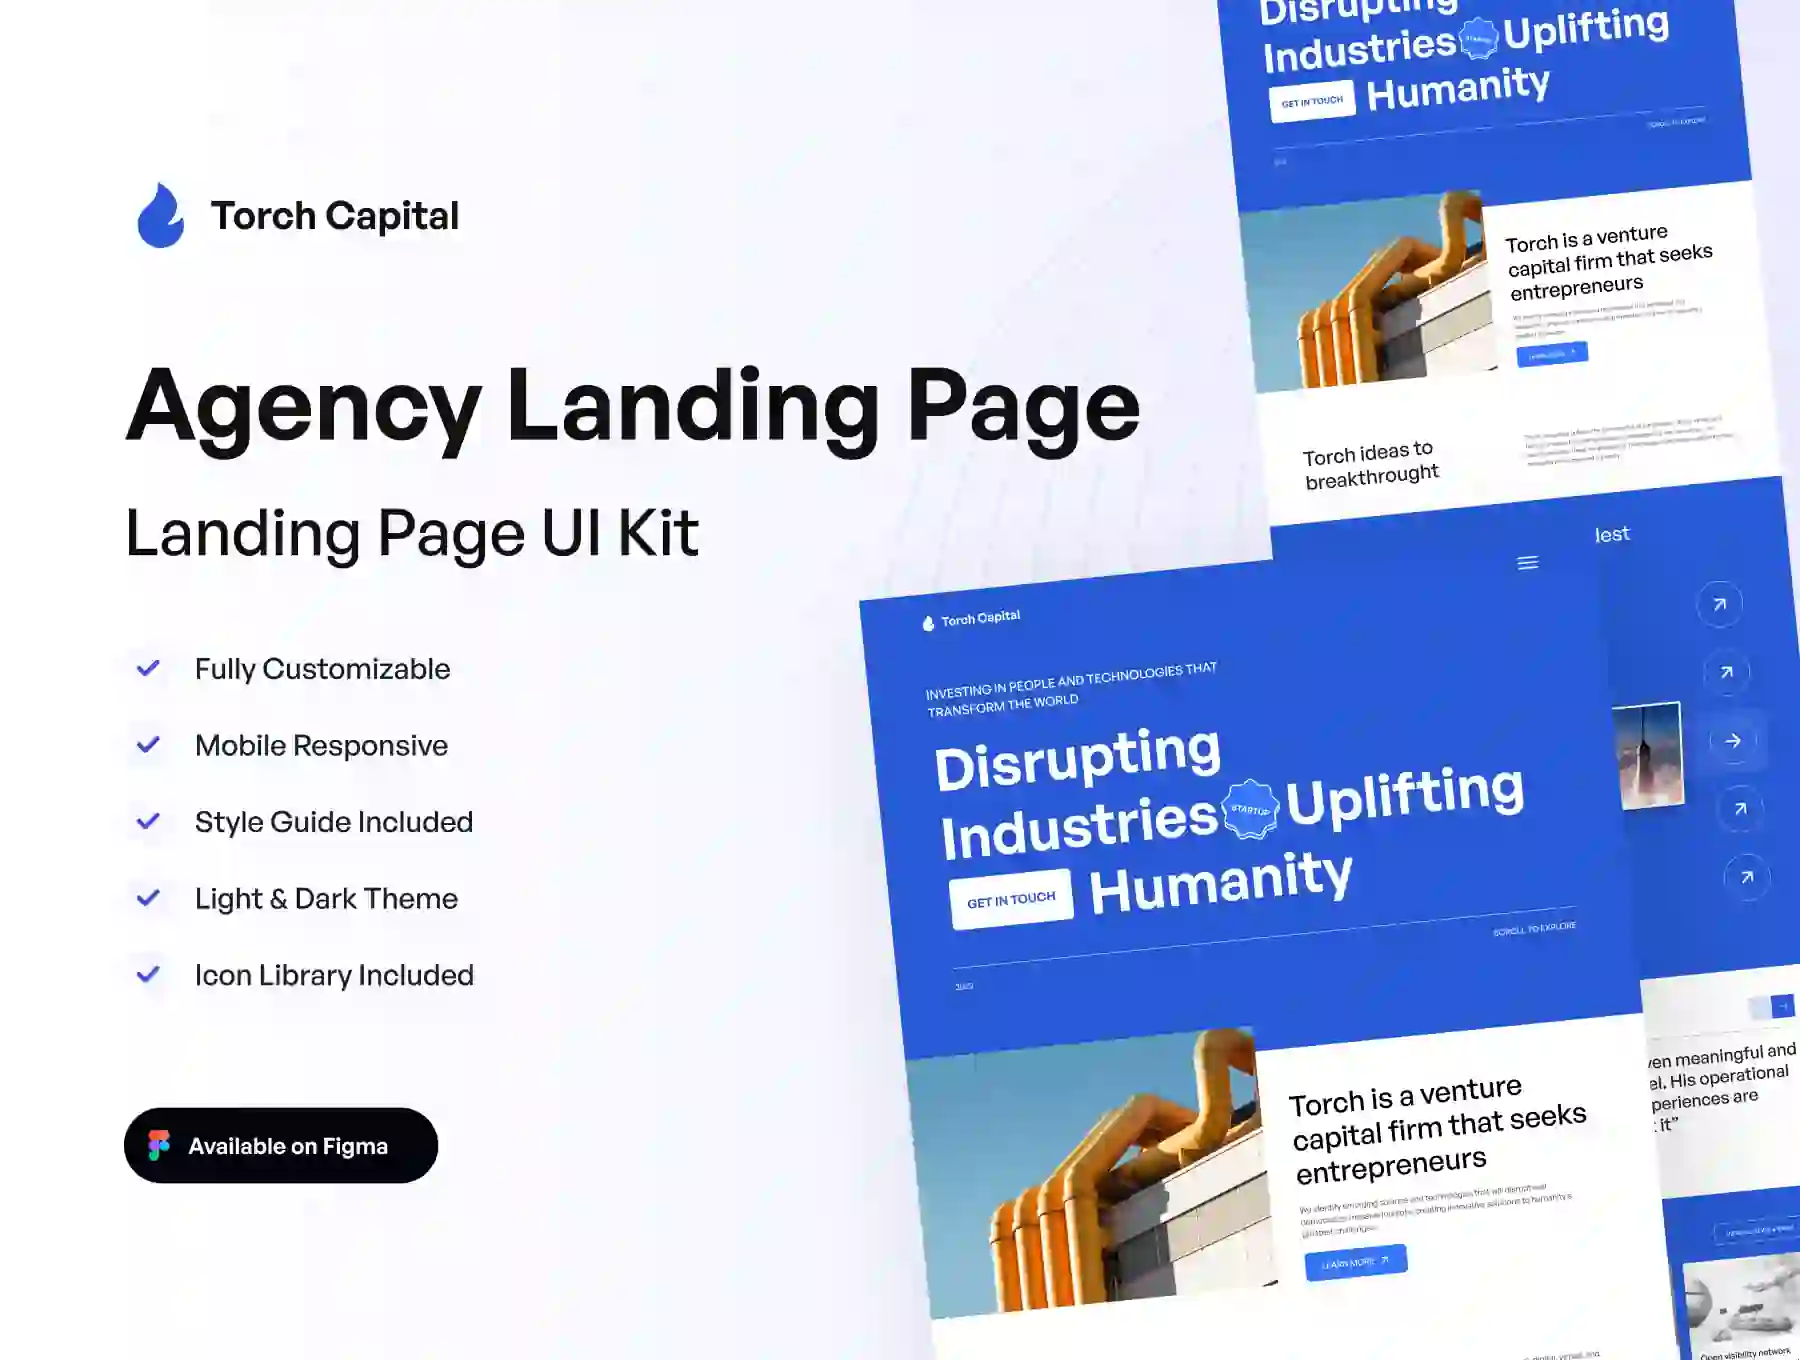 Torch Capital - Agency Landing Page